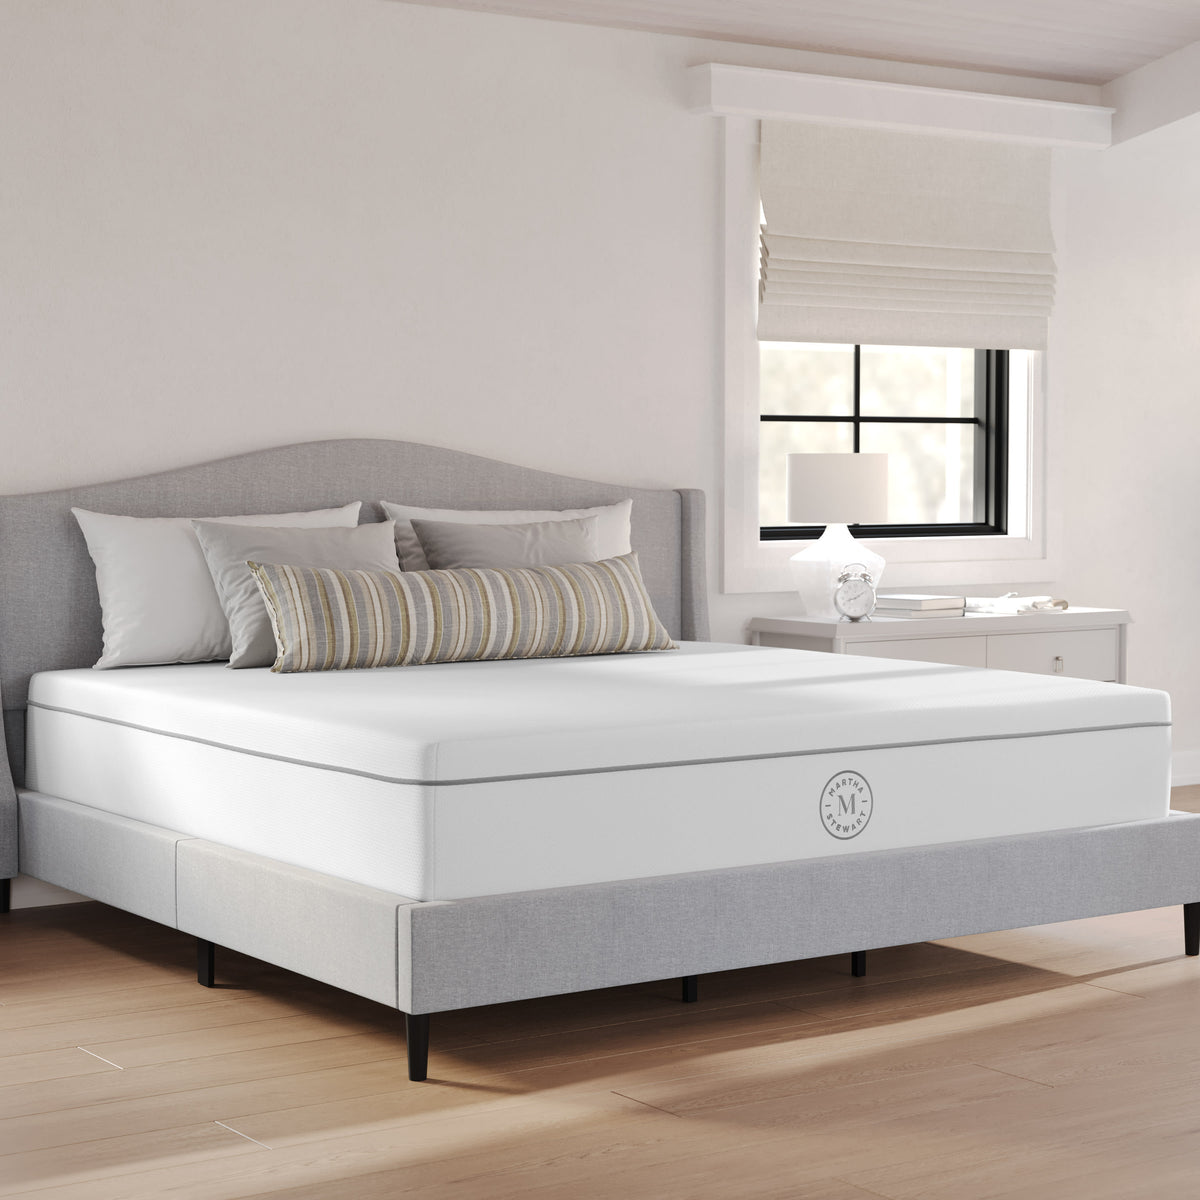 King |#| Firm Support Pocket Spring and Foam Hybrid Dual-Action Cooling Mattress - King